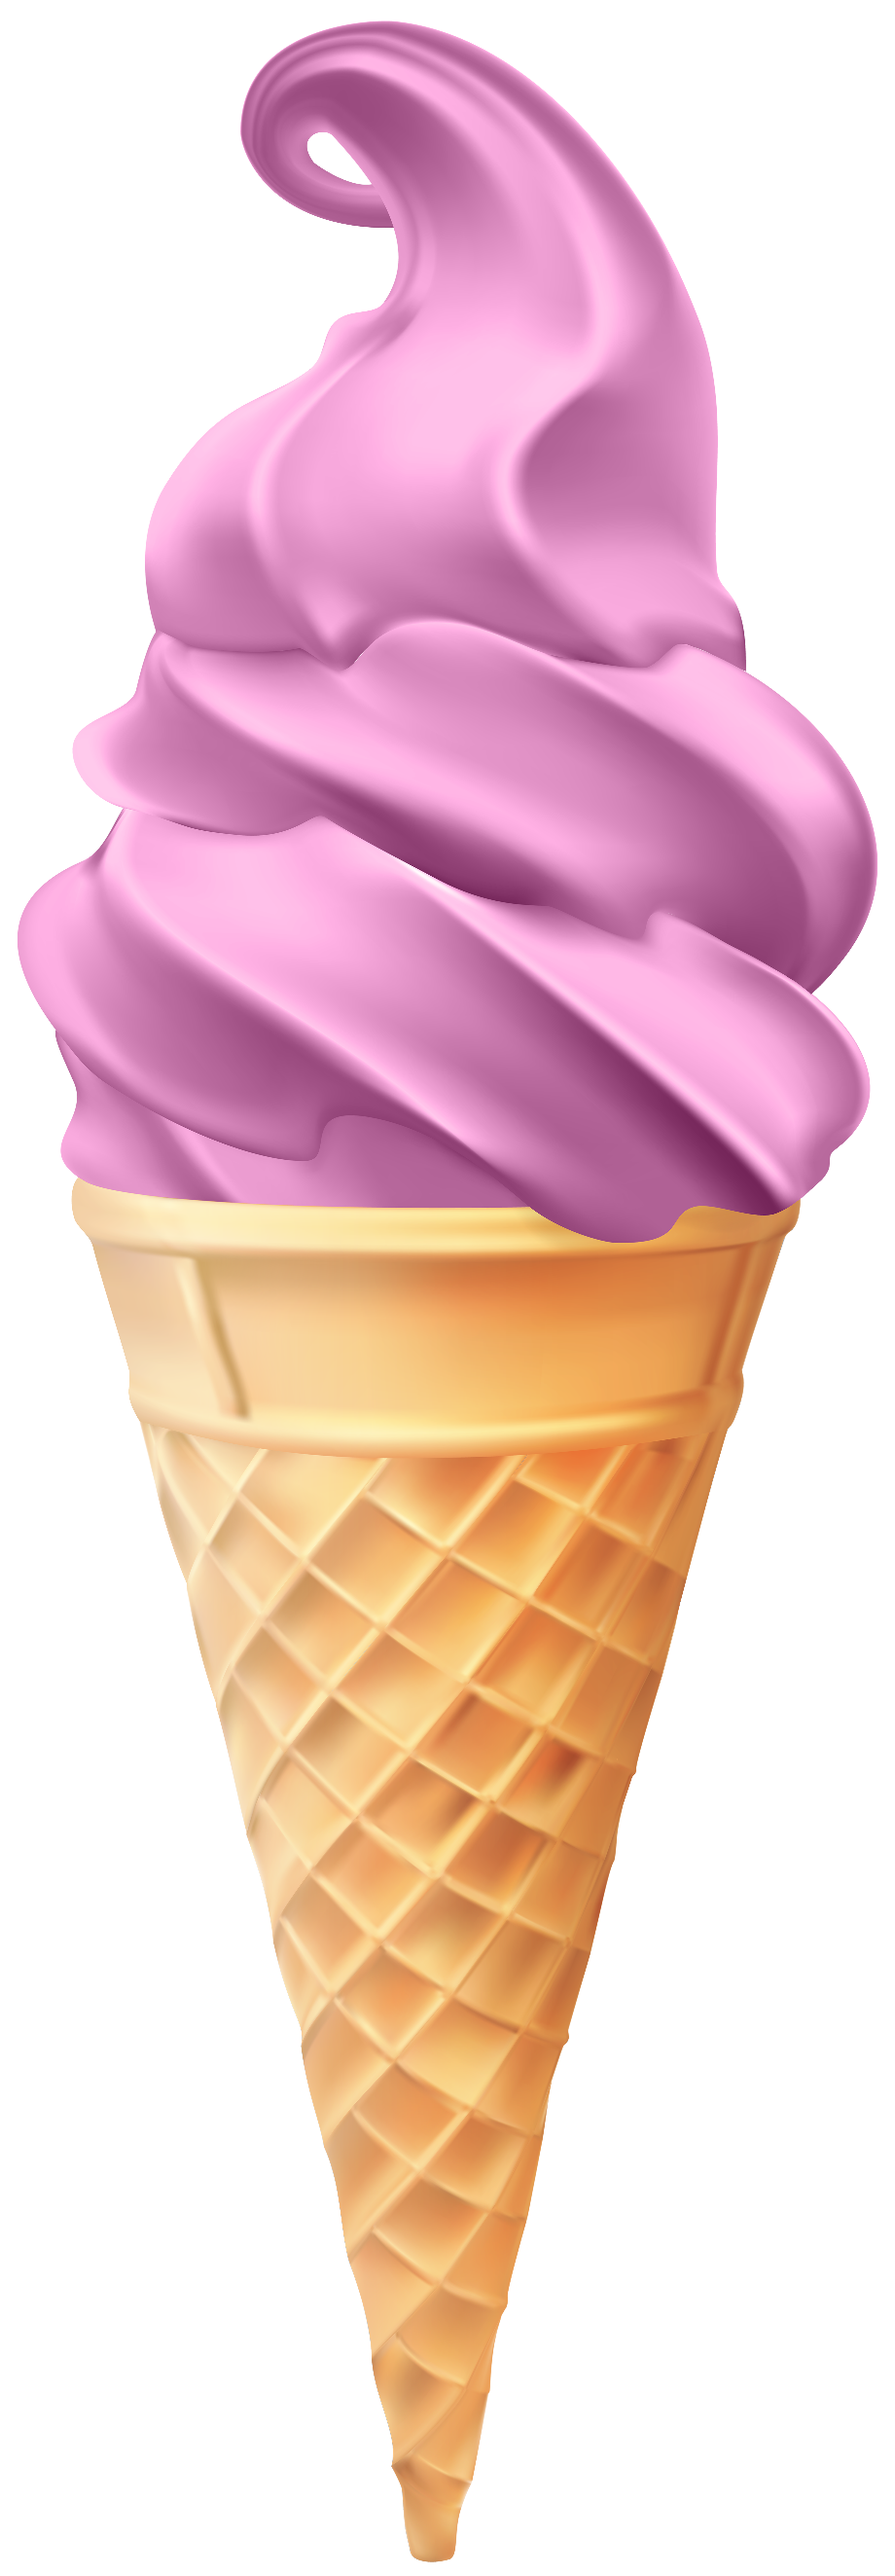 download high quality ice cream cone clip art pink